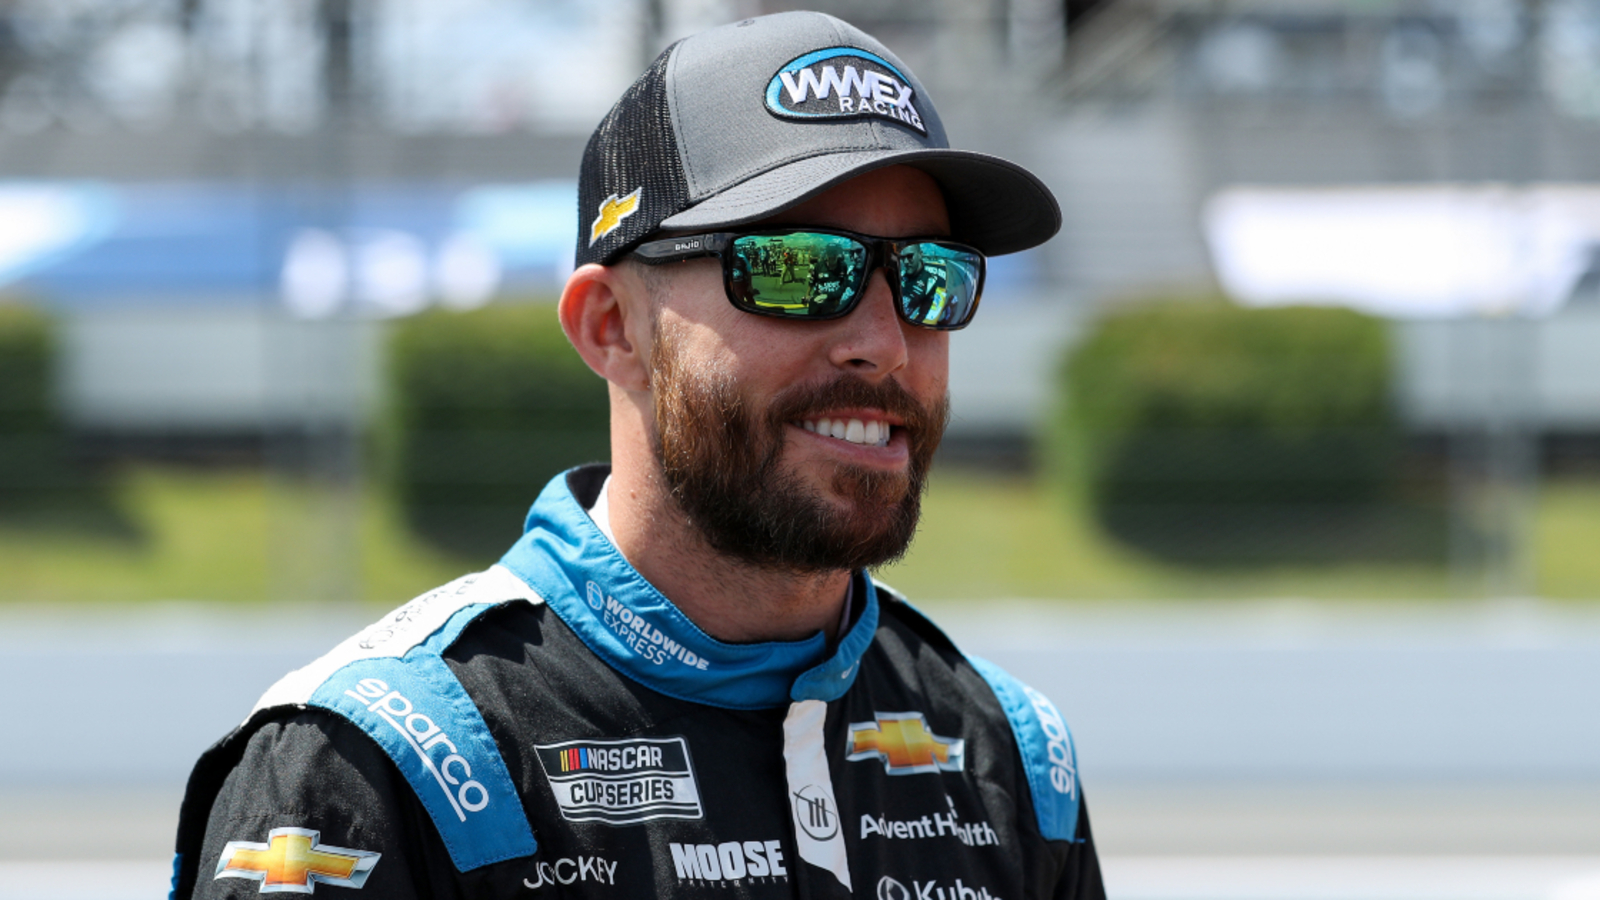 Ross Chastain returns to Kaulig Racing for Xfinity Series start at Michigan